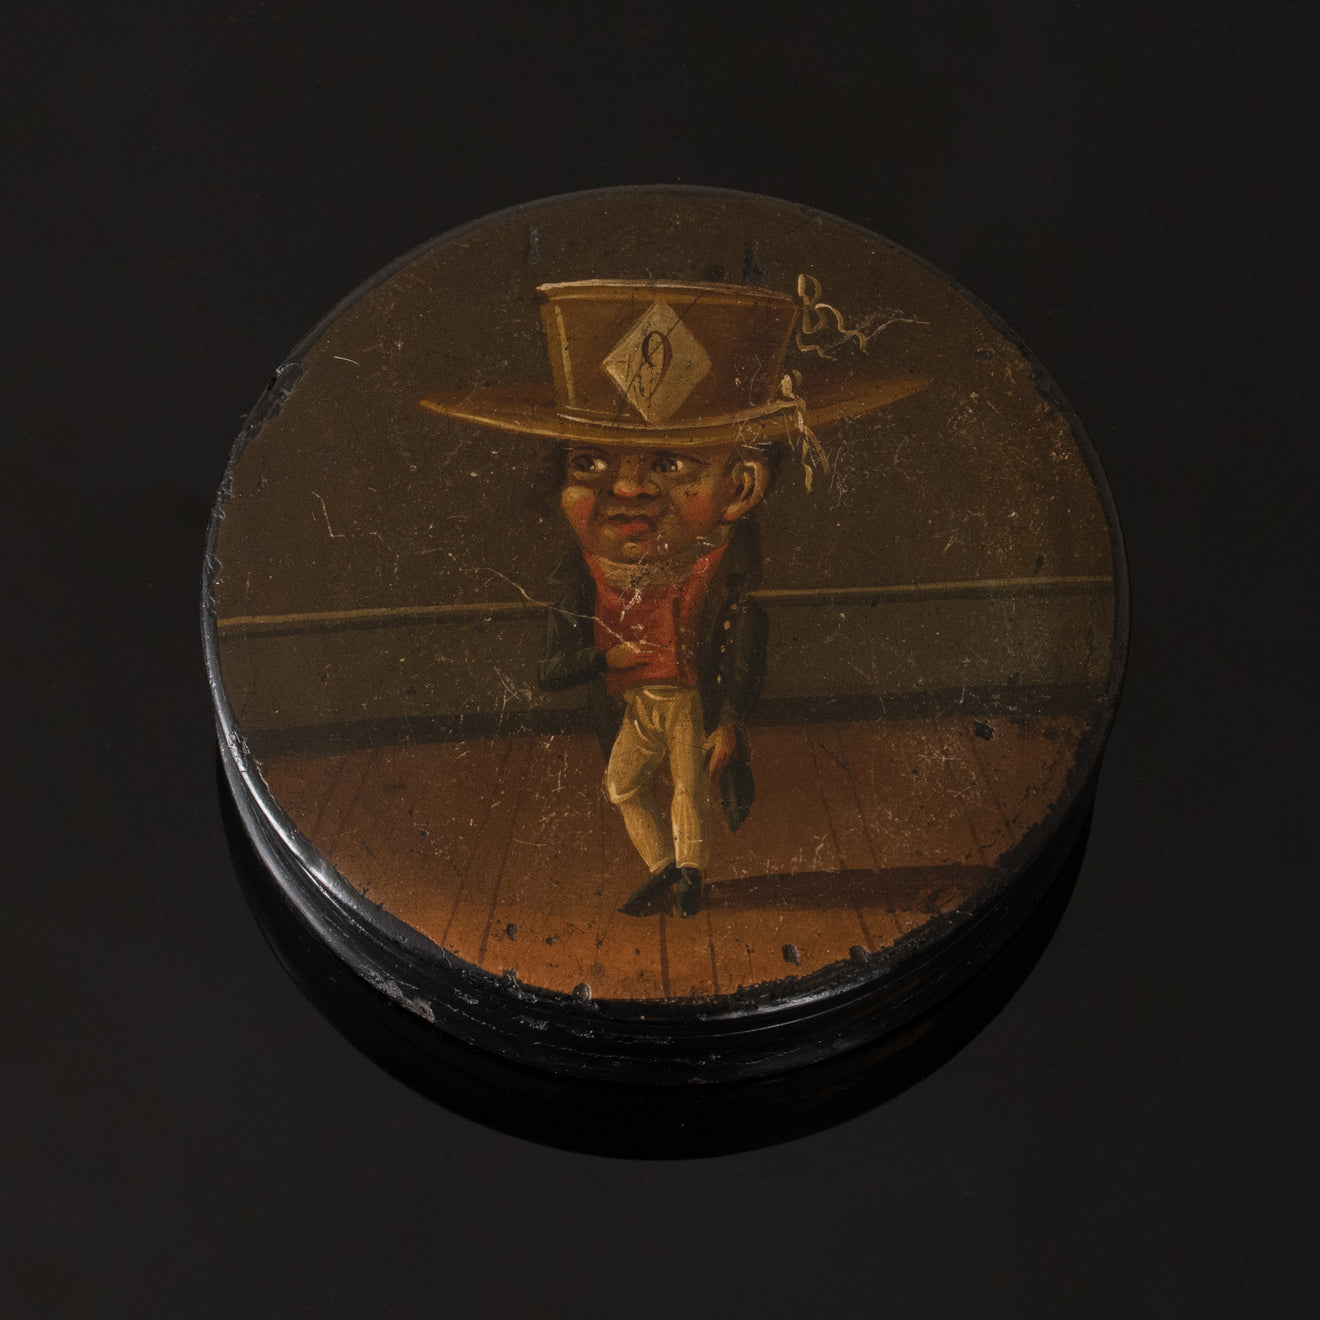 Auction -HAND PAINTED SNUFF BOX